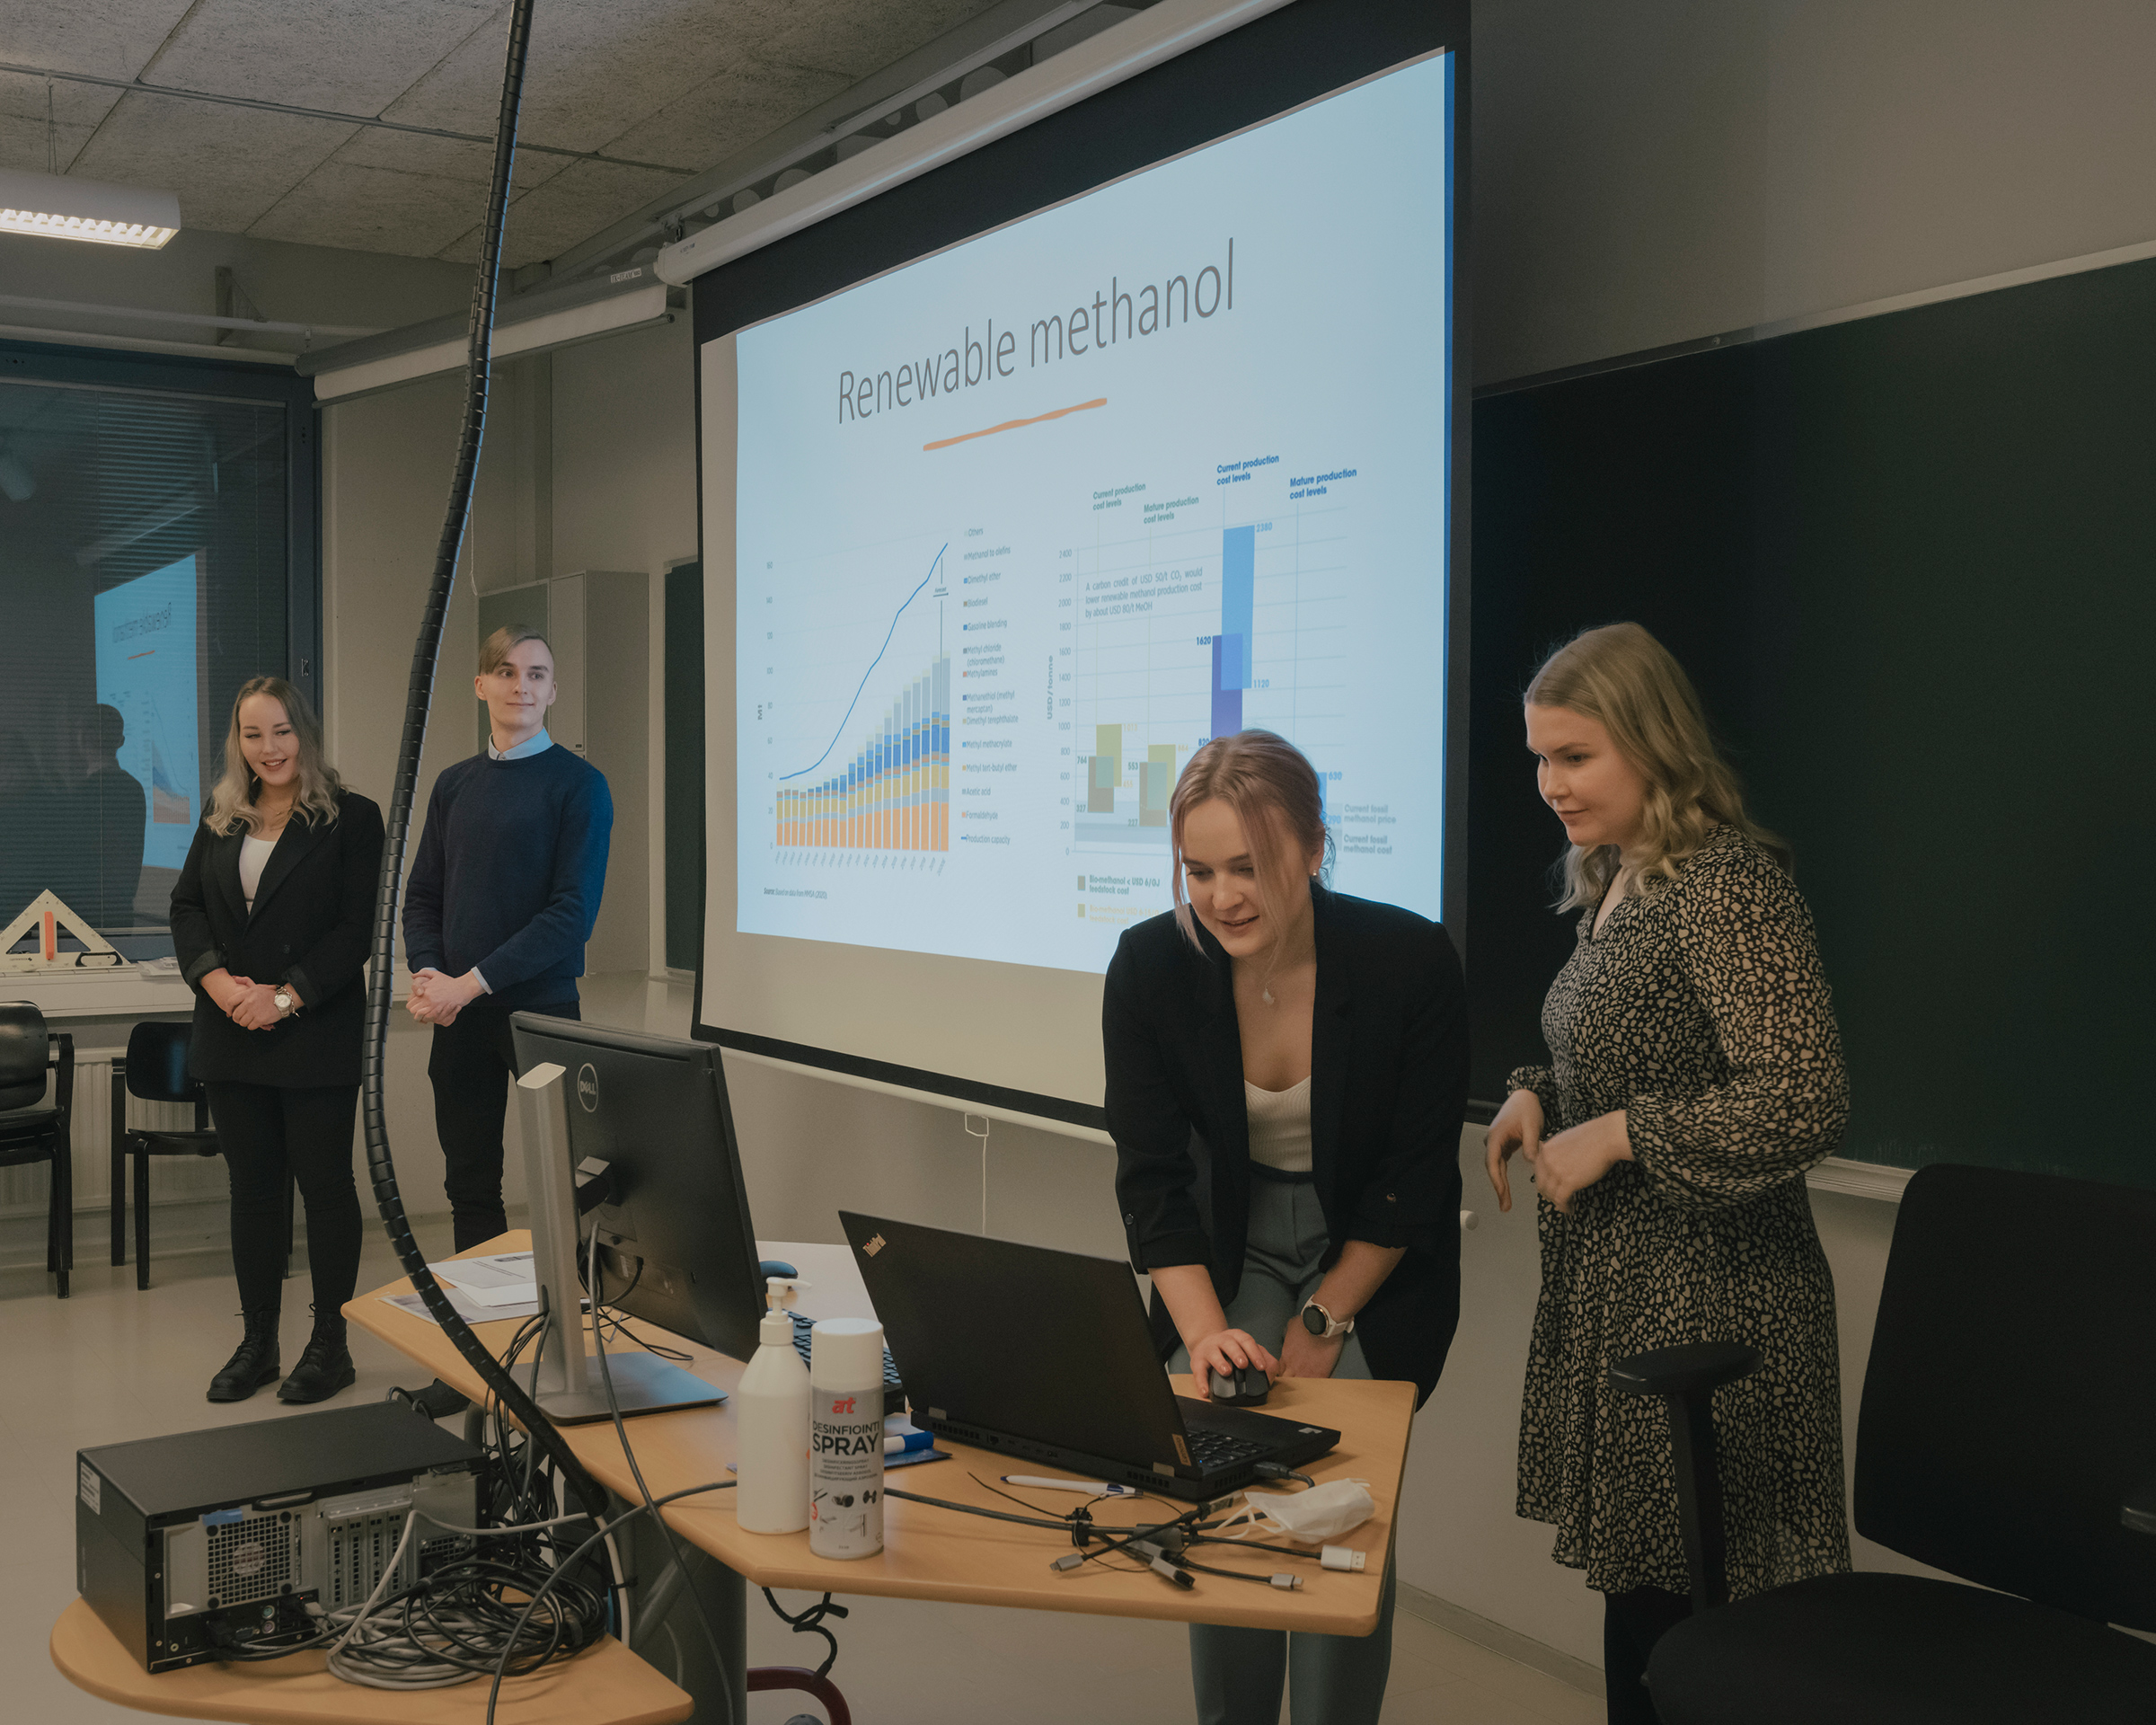 University students in Helsinki present research on new business models for energy company St1, during a Dec. 14 class (Ingmar Björn Nolting for TIME)